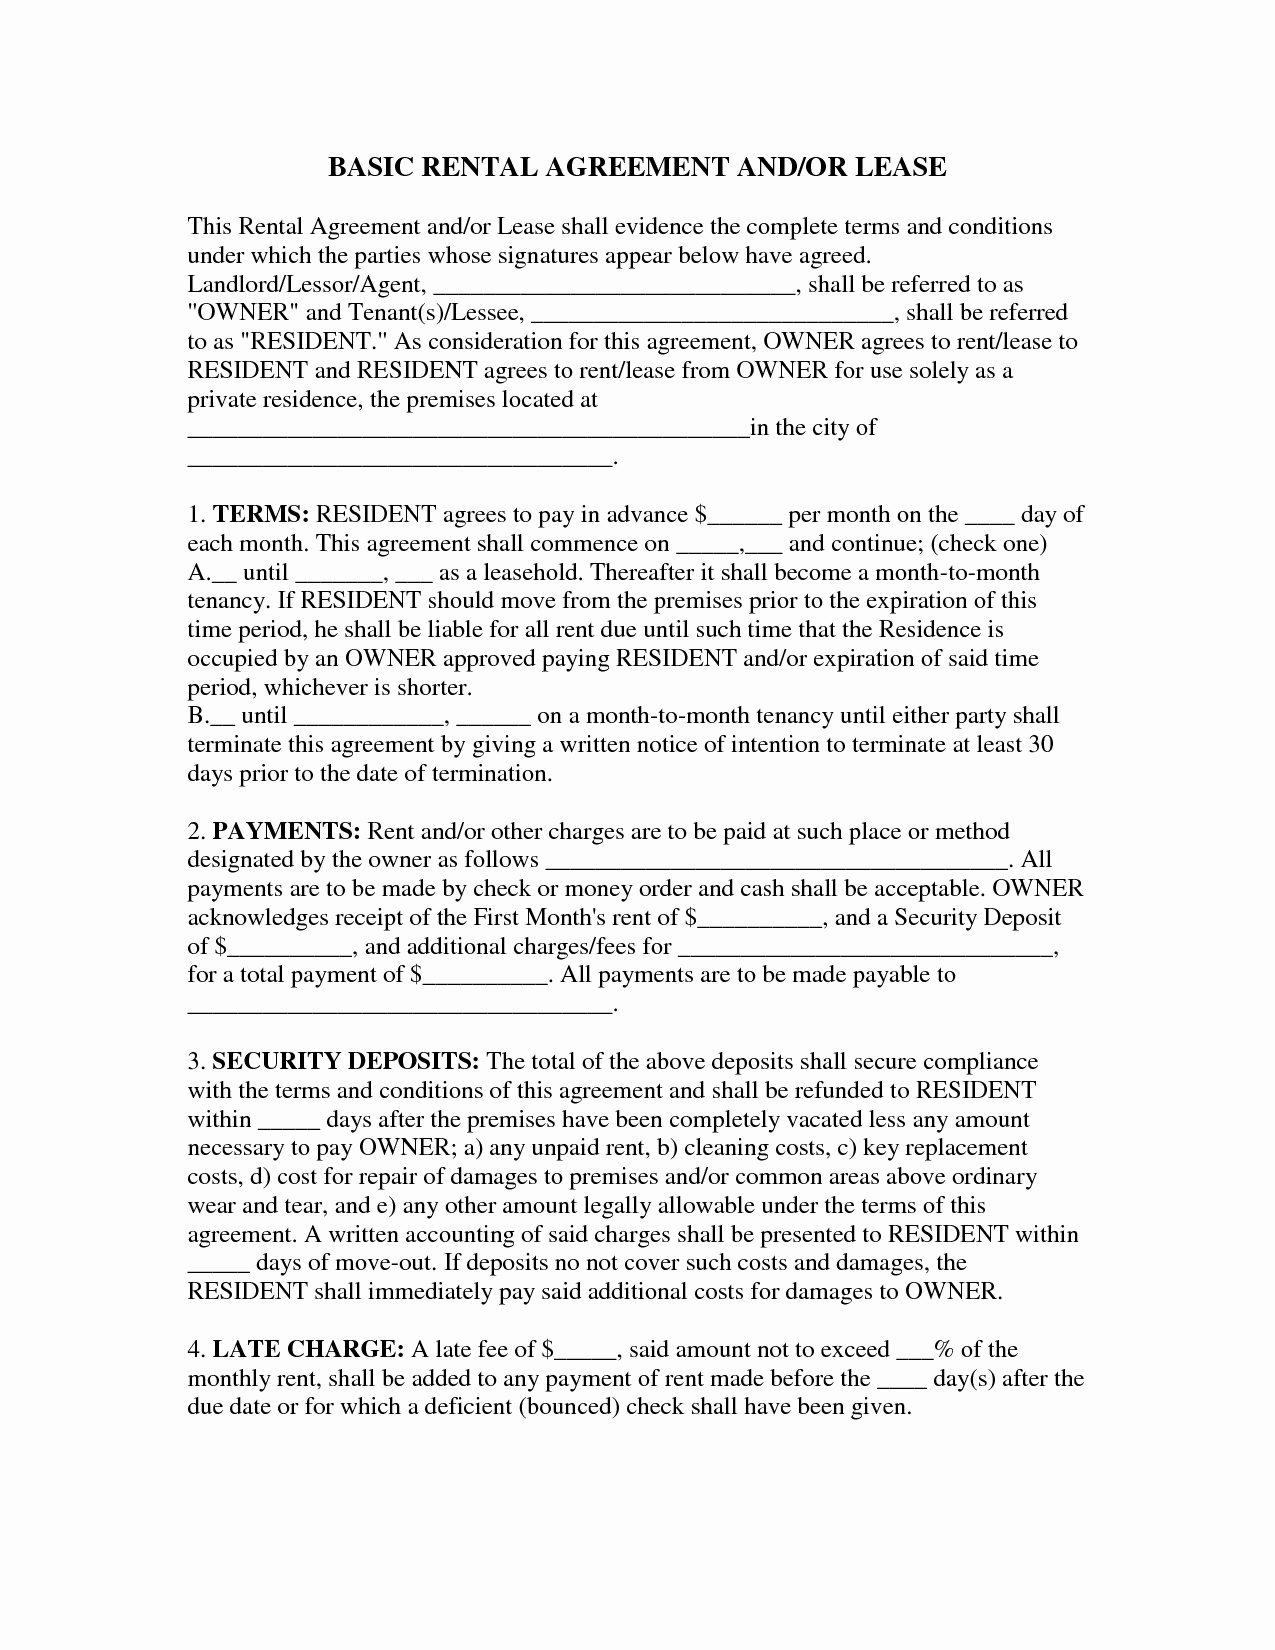 Basic Lease Agreement Template Unique Lease Basic Rental Agreement